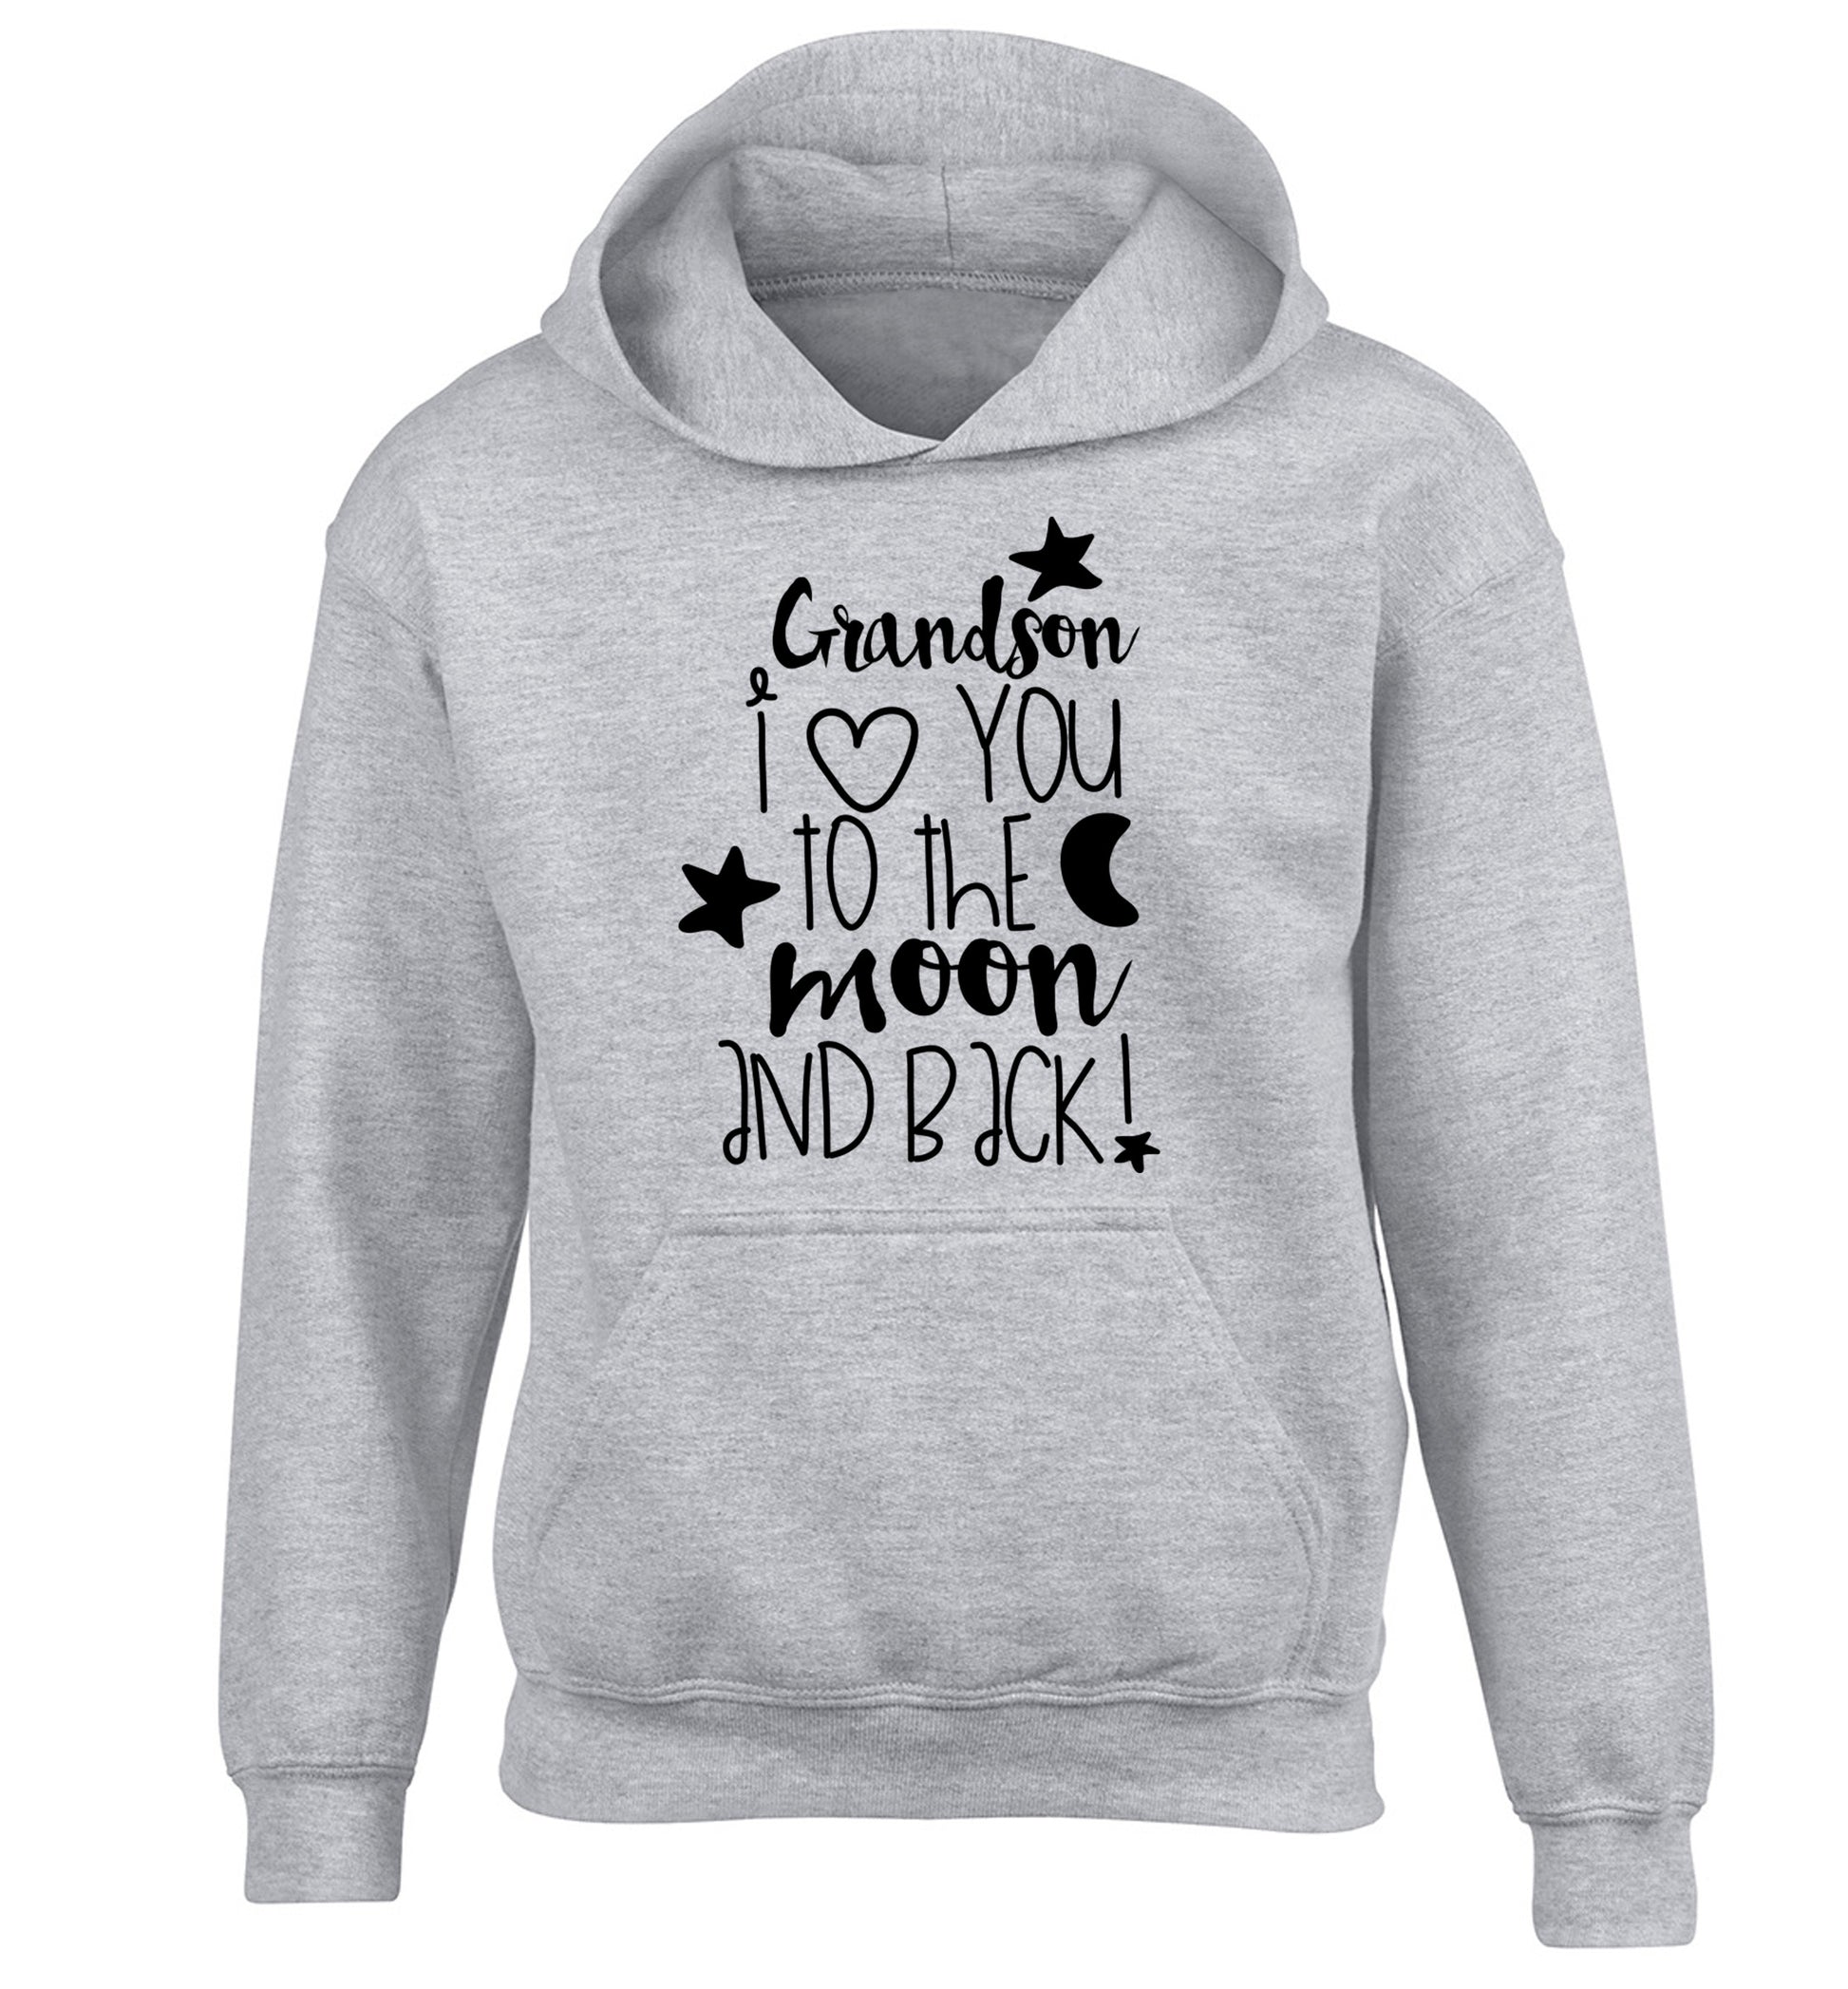 Grandson I love you to the moon and back children's grey hoodie 12-14 Years